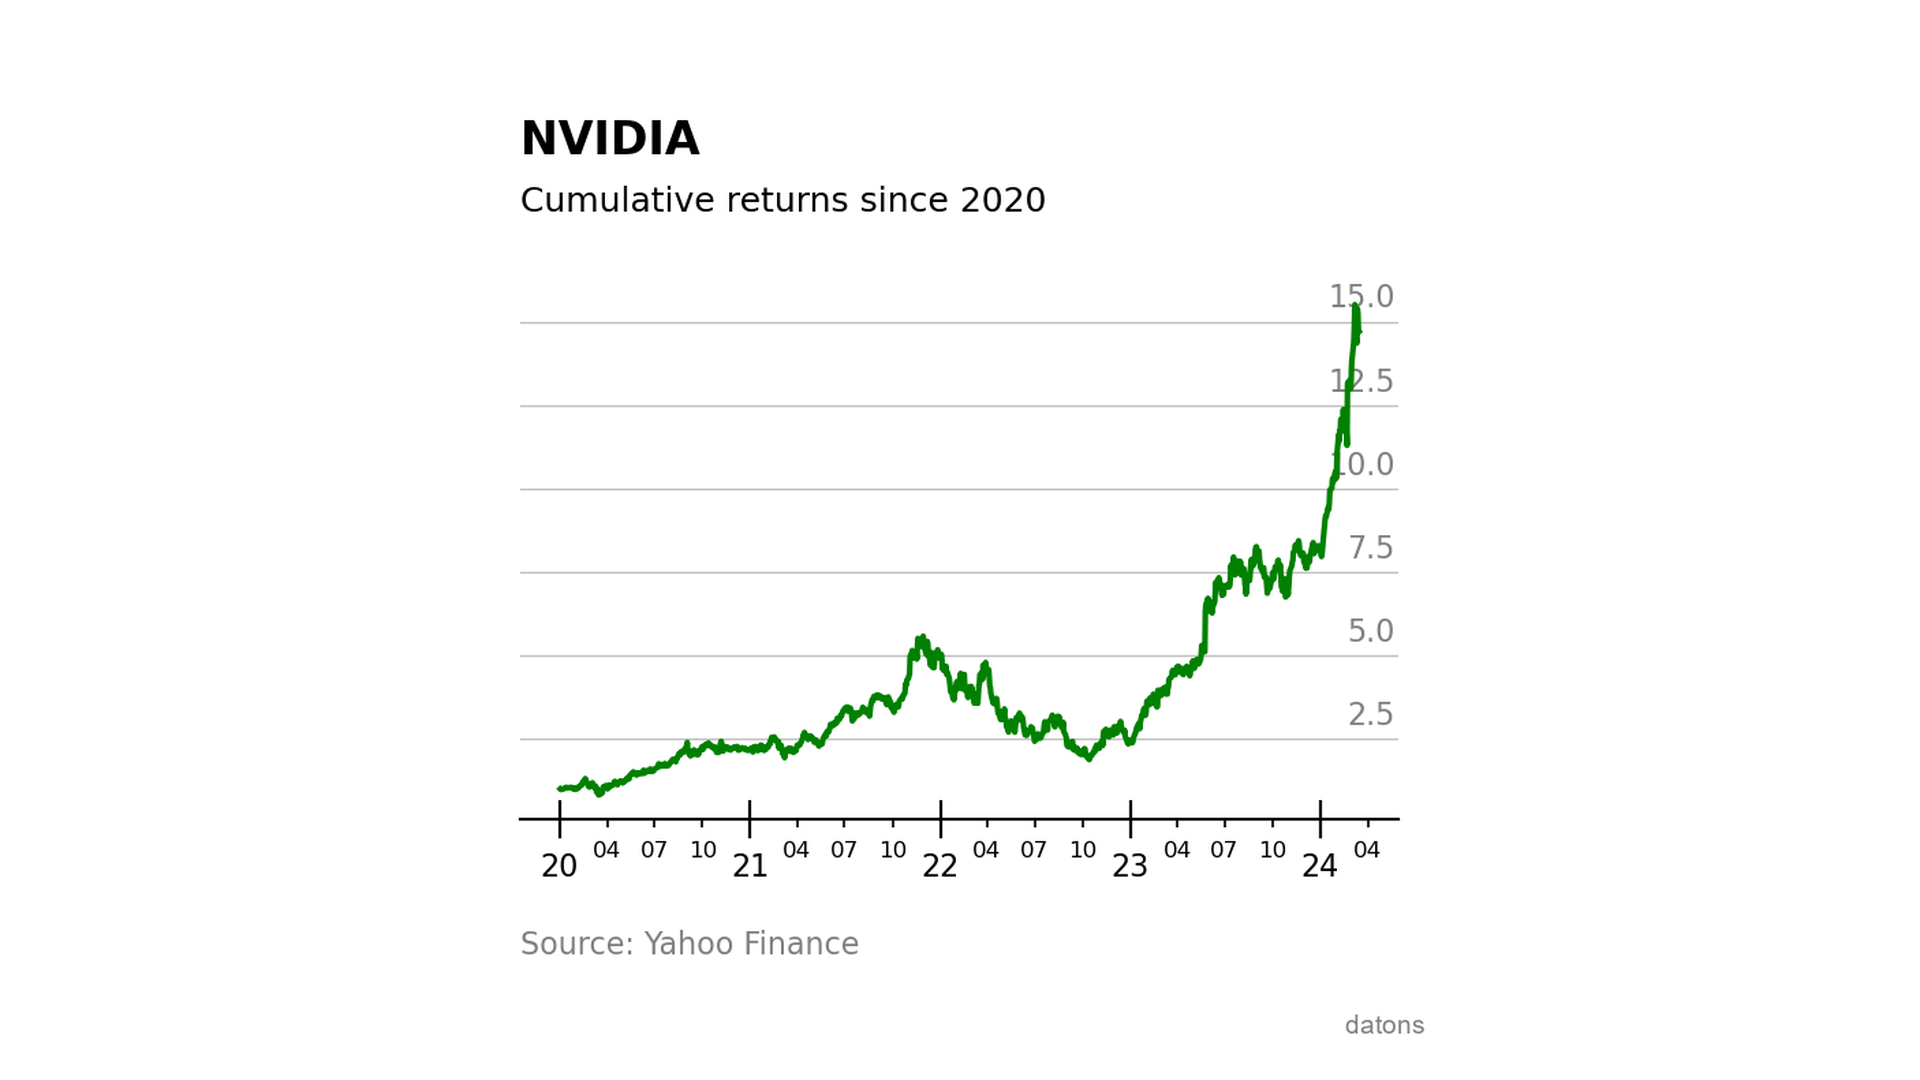 Graph of the cumulative return of an investment in NVIDIA's shares from the start of 2020, showing exponential growth.